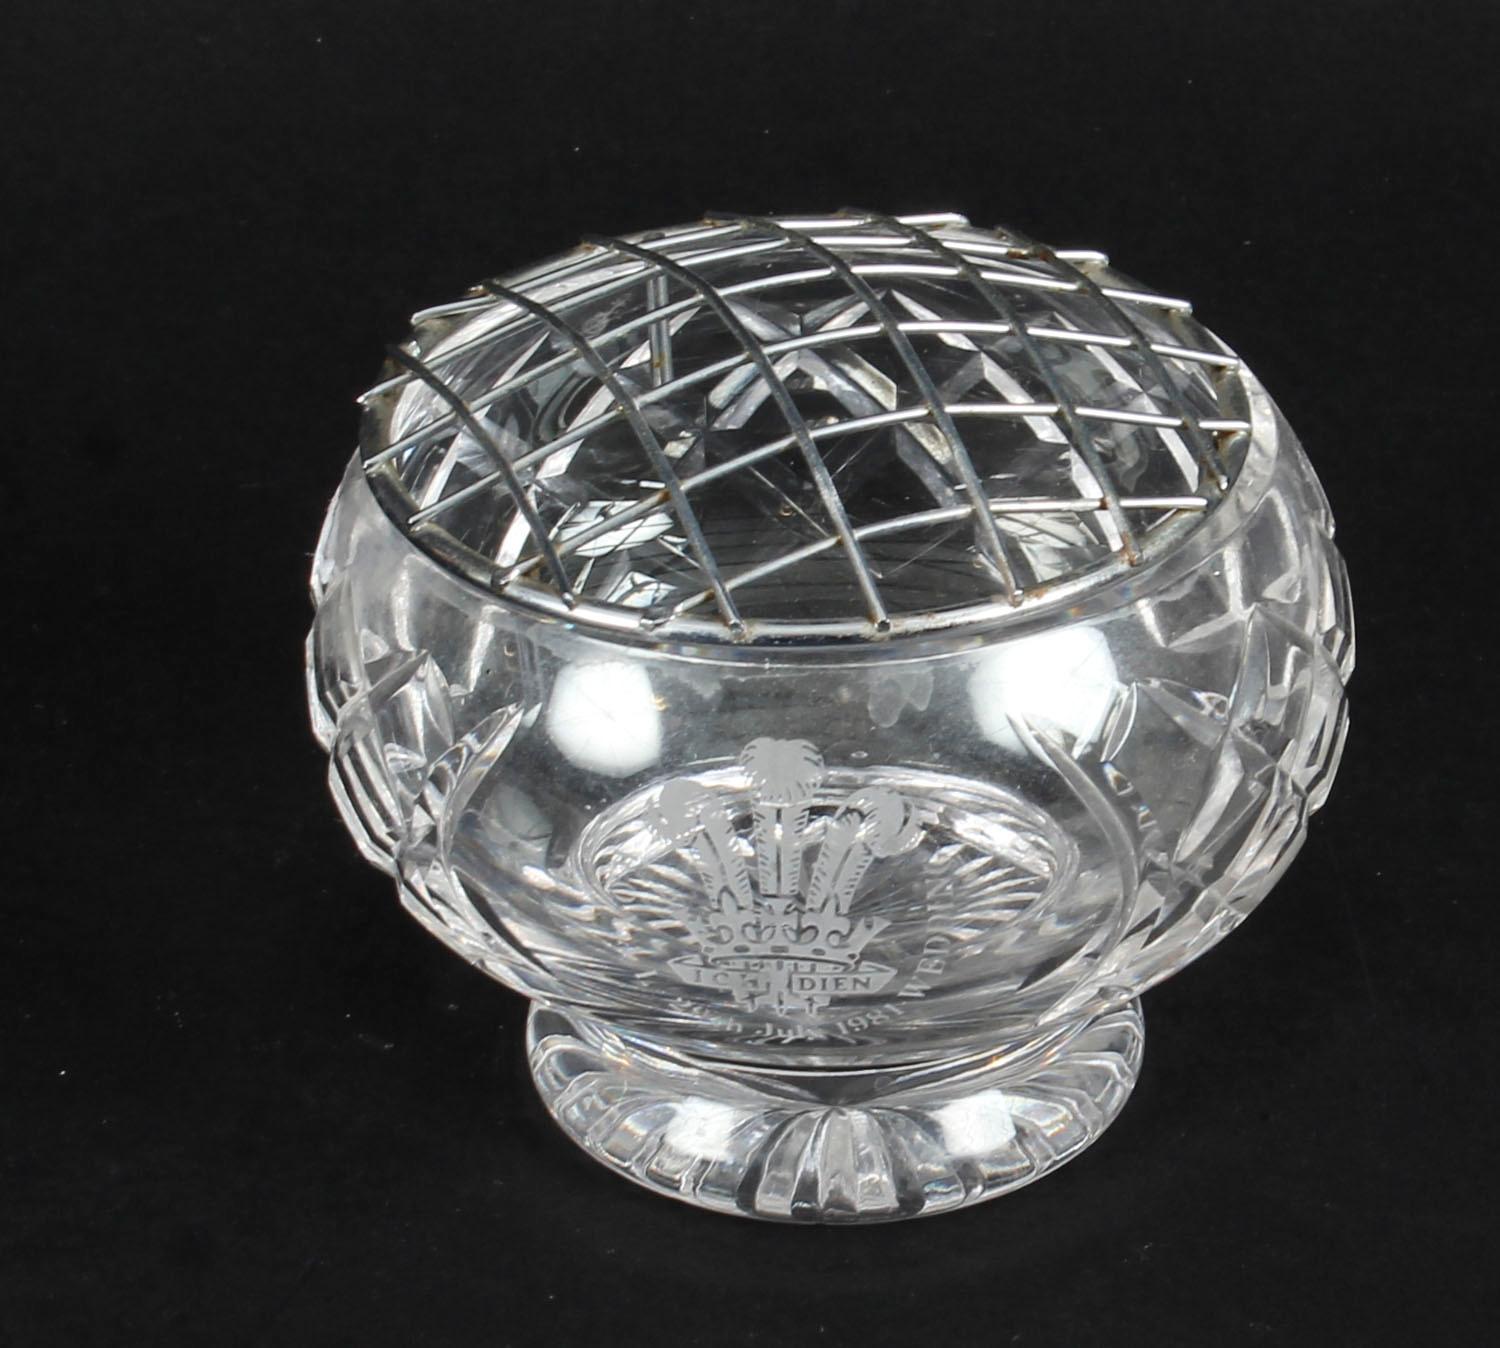 This is a splendid vintage Royal memorabilia cut glass rose bowl dating from the late 20th century.
 
This gorgeous small cut glass rose bowl is round in shape and it is commemorative of the Royal wedding of Prince Charles and Lady Diana Spencer